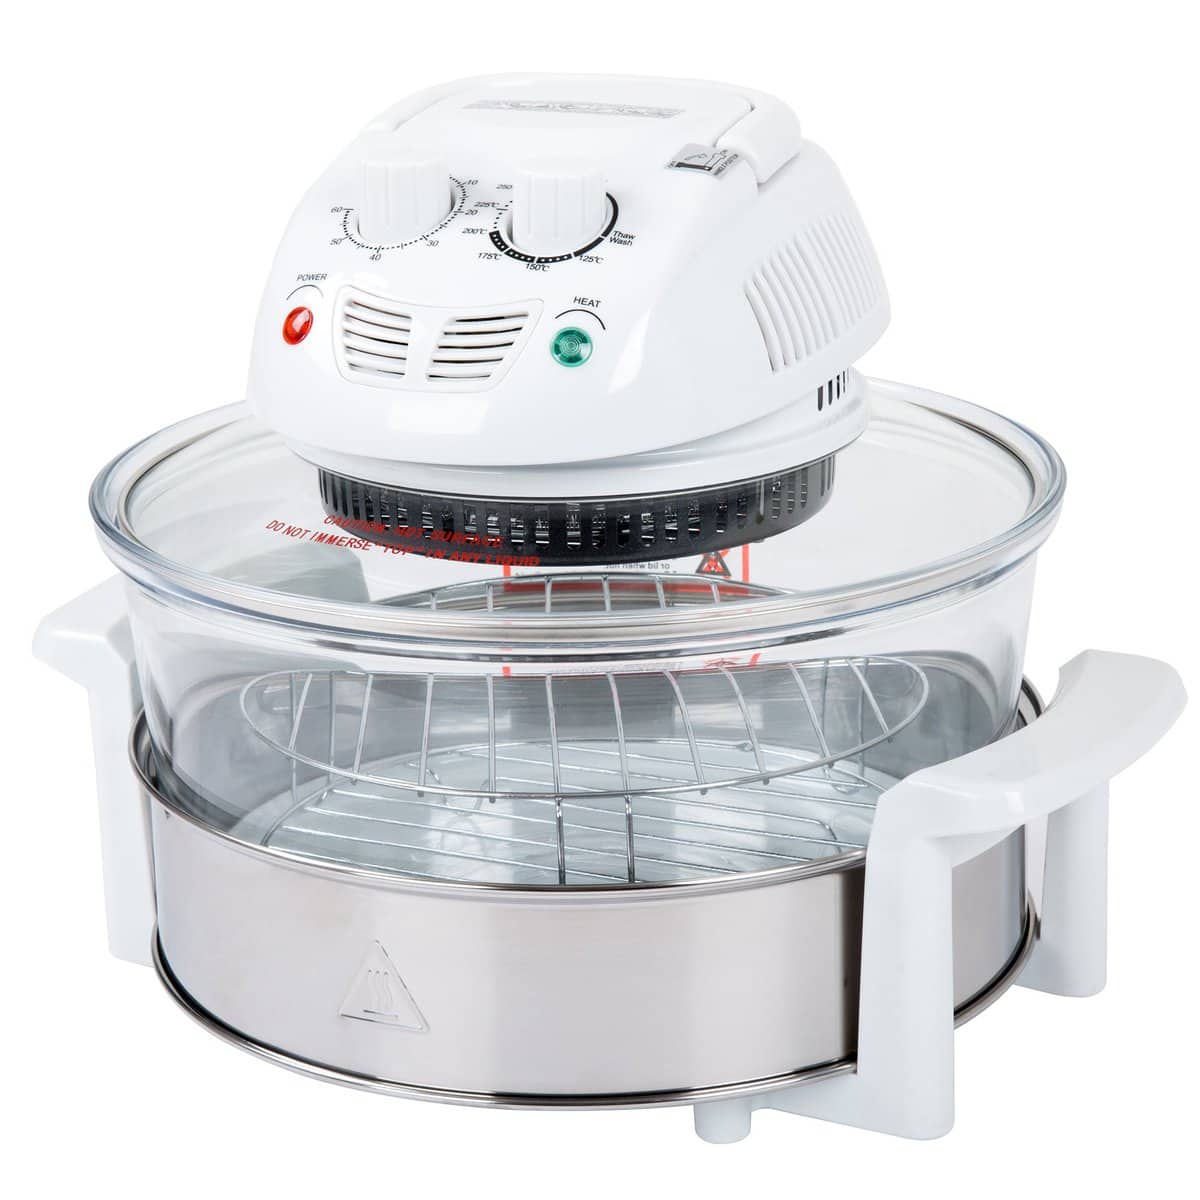 A Classic Cuisine 12-17 Quart Halogen Tabletop Oven in white. 